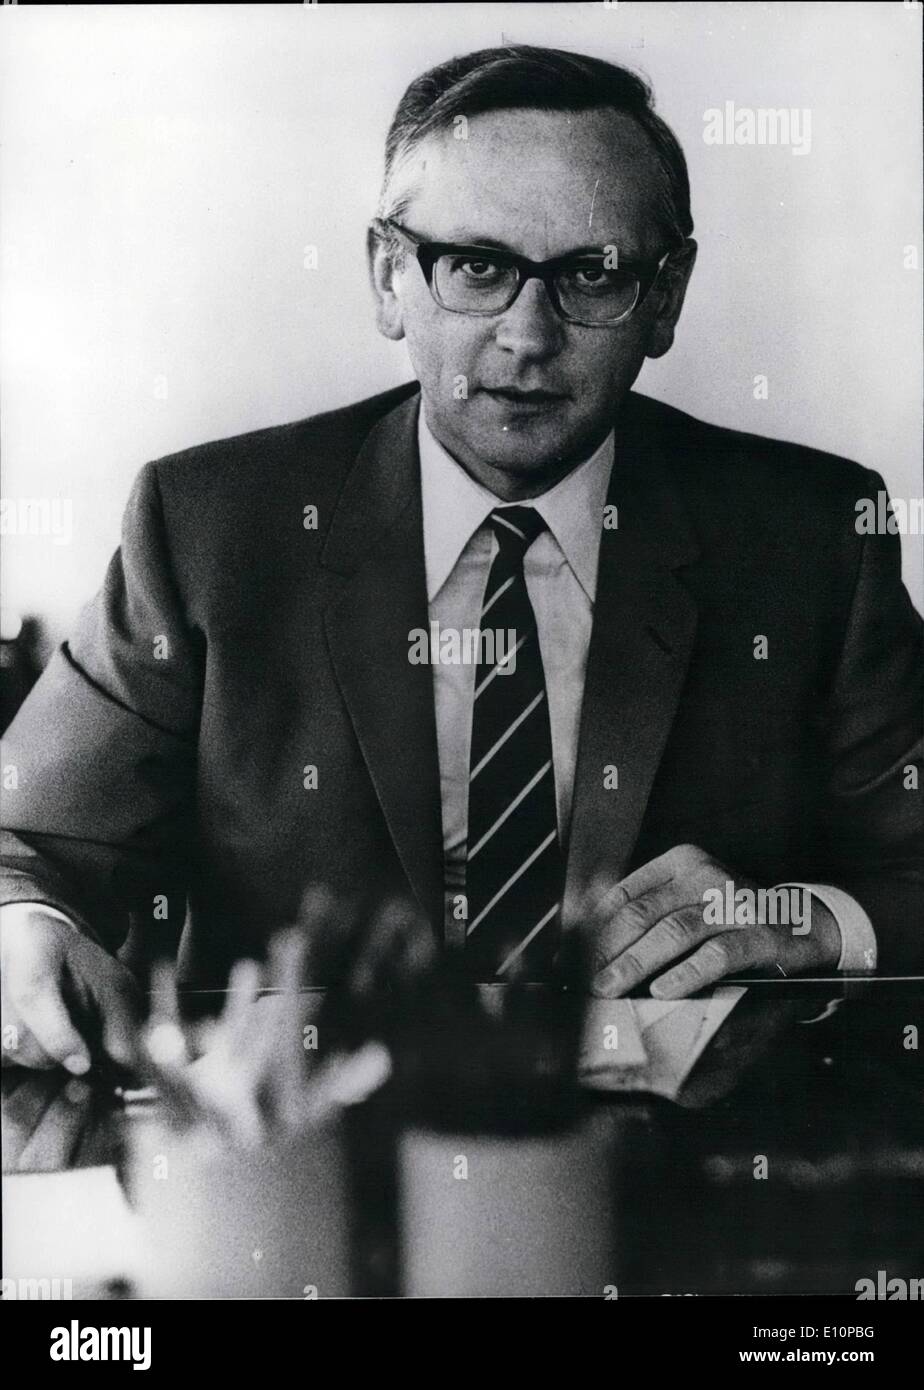 Nov. 11, 1973 - Will ''Spiegel-chief-editor Gunter Gaus be the West German representative in East Berlin? In Government circles Stock Photo